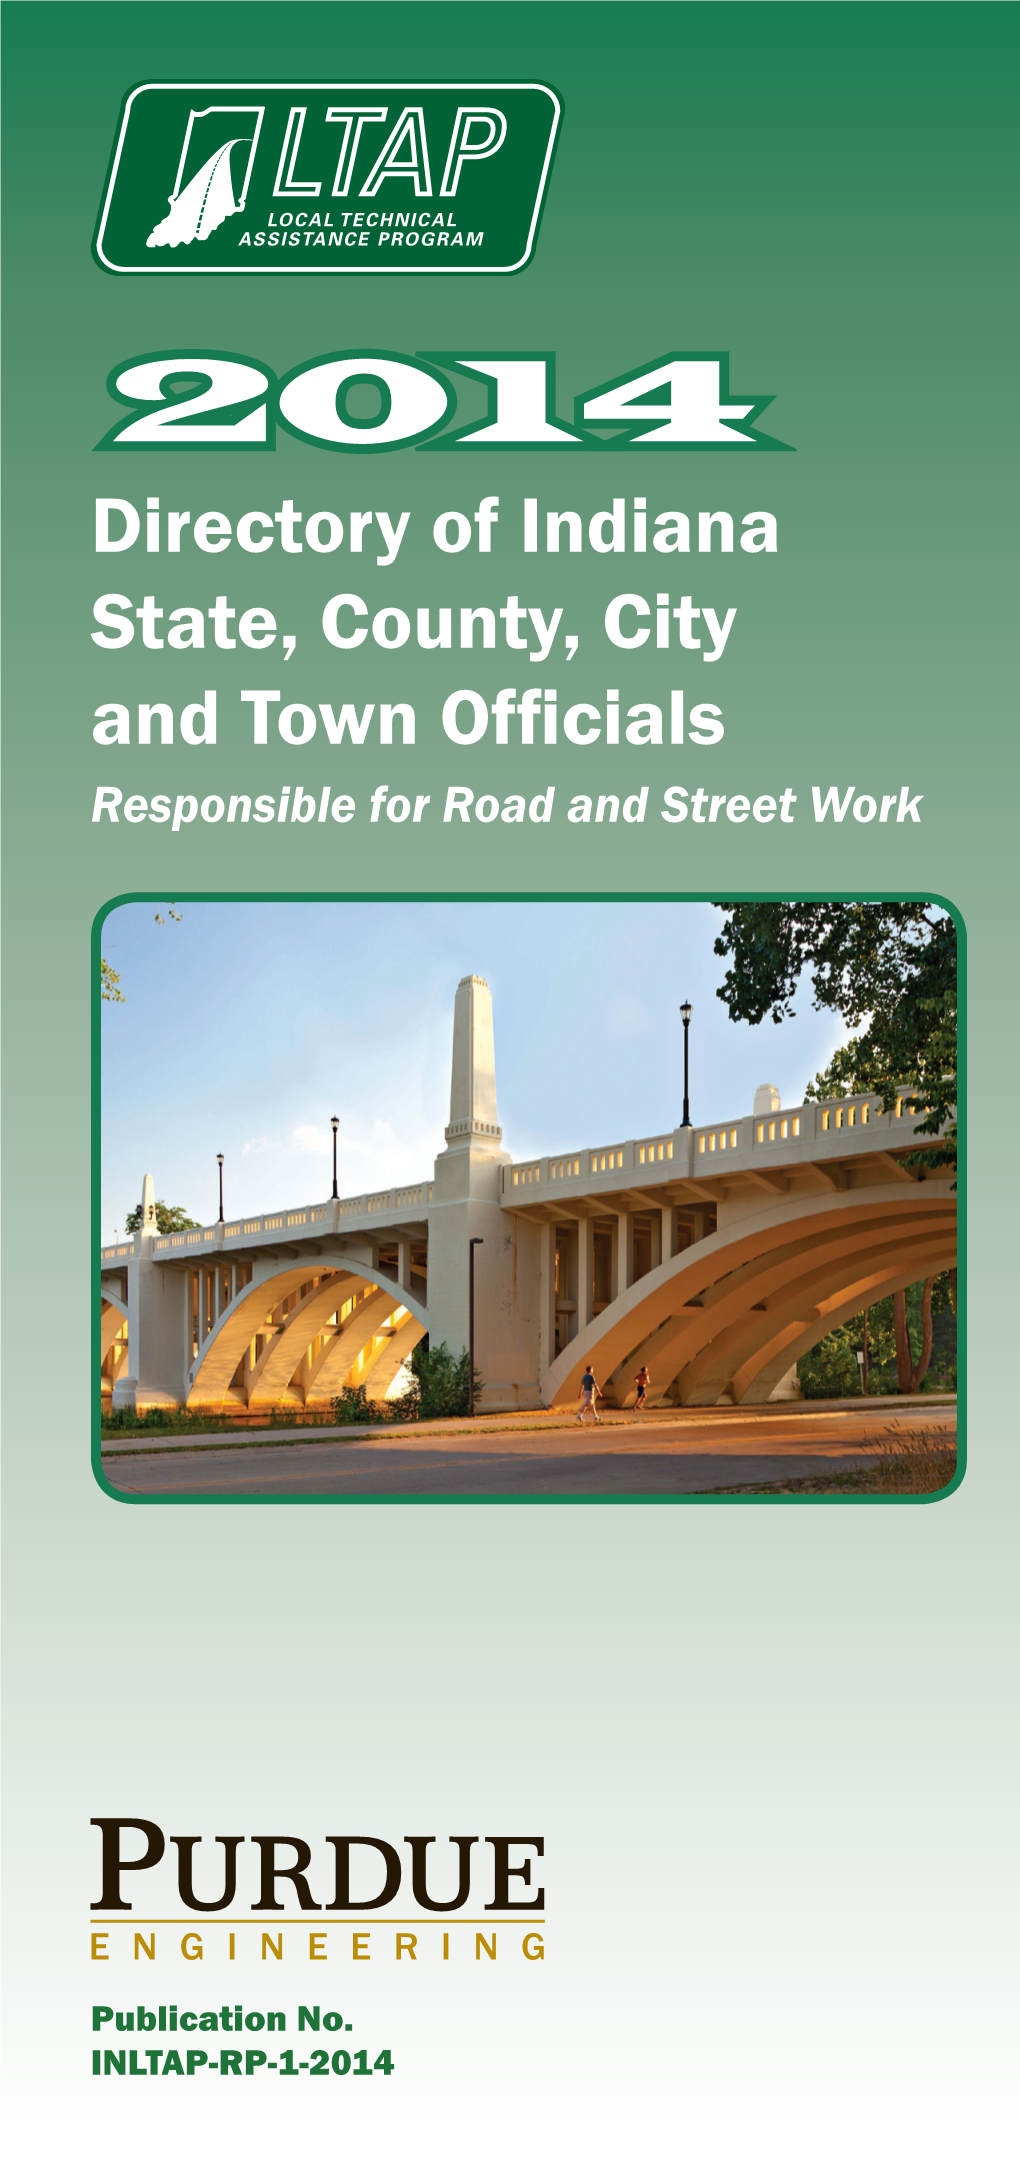 2014 Directory of Indiana State, County, City and Town Officials Responsible for Road and Street Work